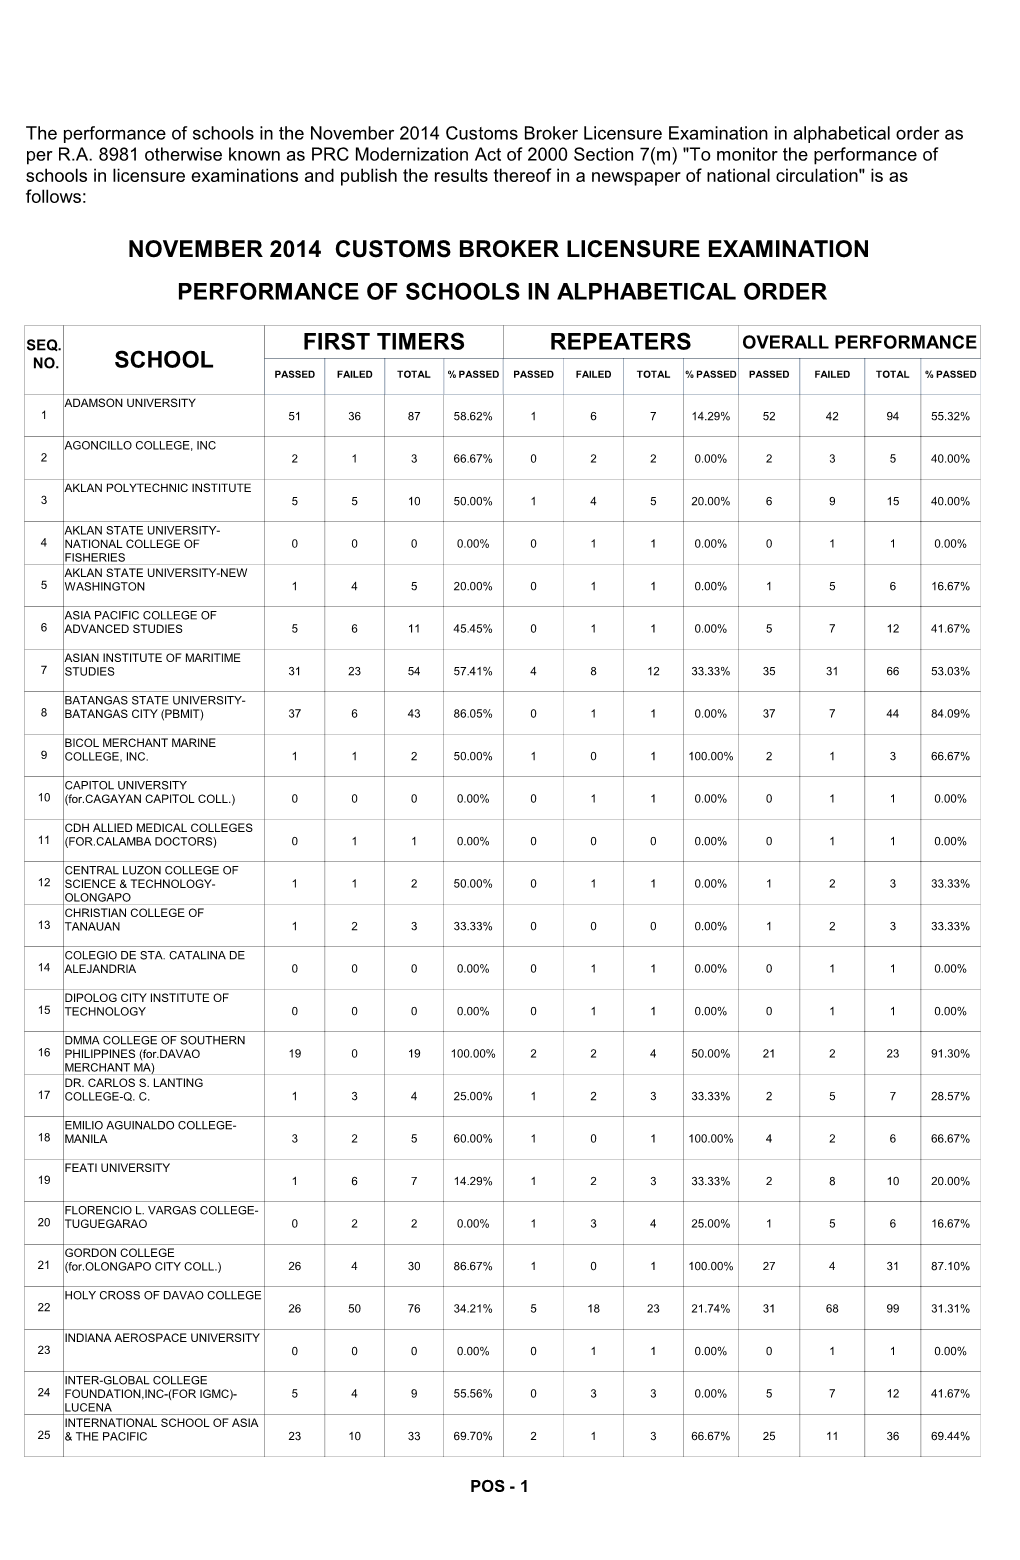 Performance of Schools in the November 2014 Customs Broker Licensure Examination in Alphabetical Order As Per R.A